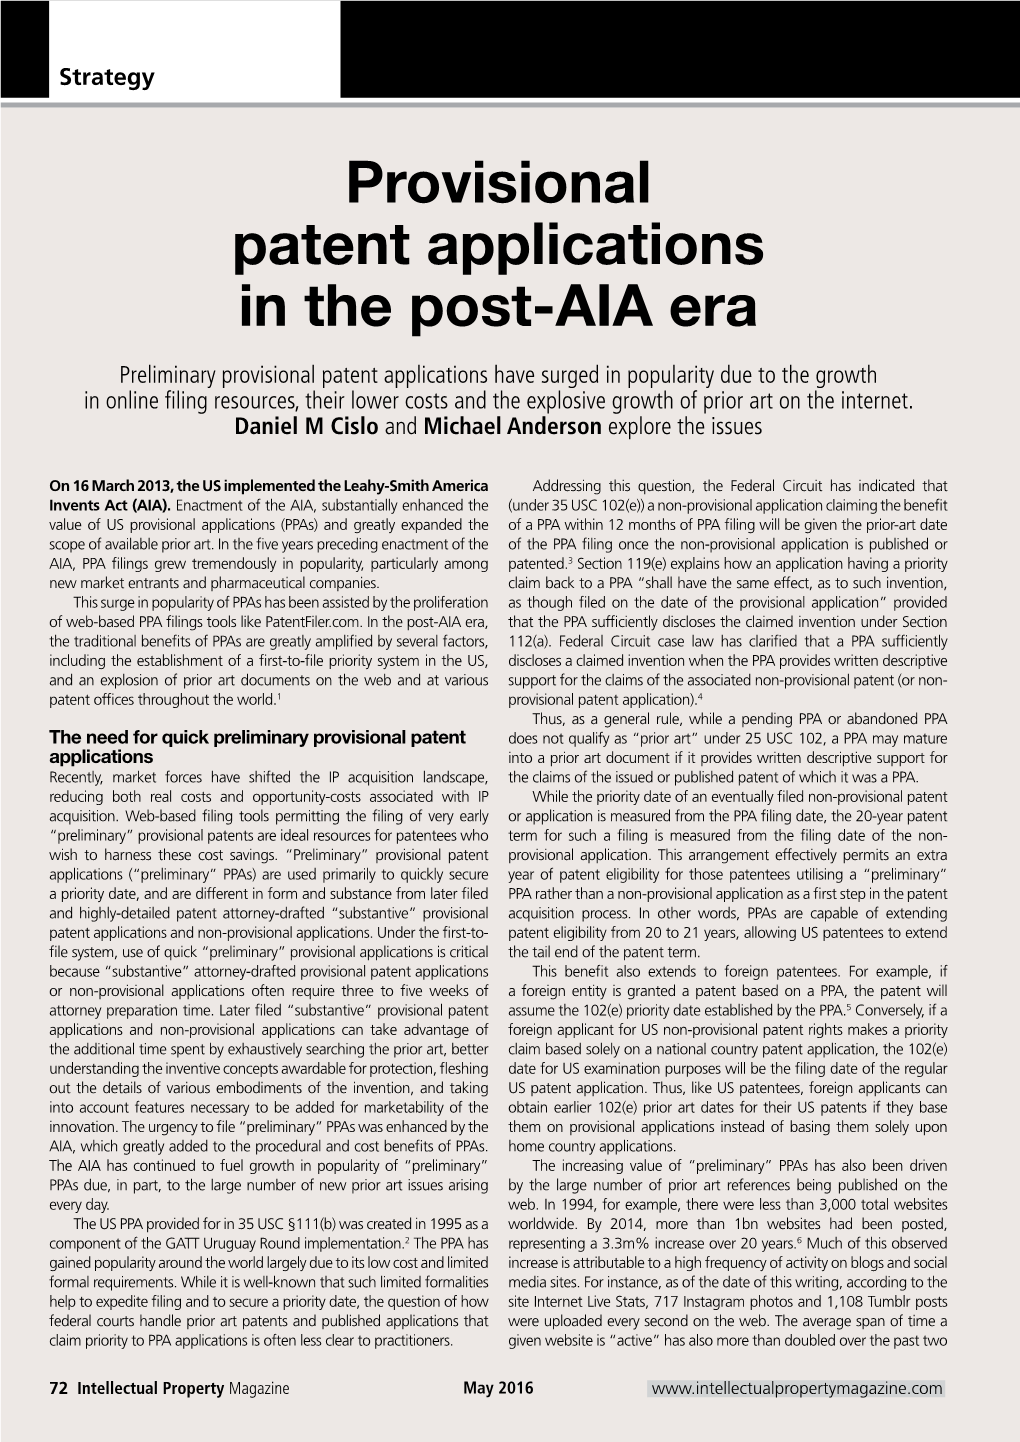 Provisional Patent Applications in the Post-AIA Era